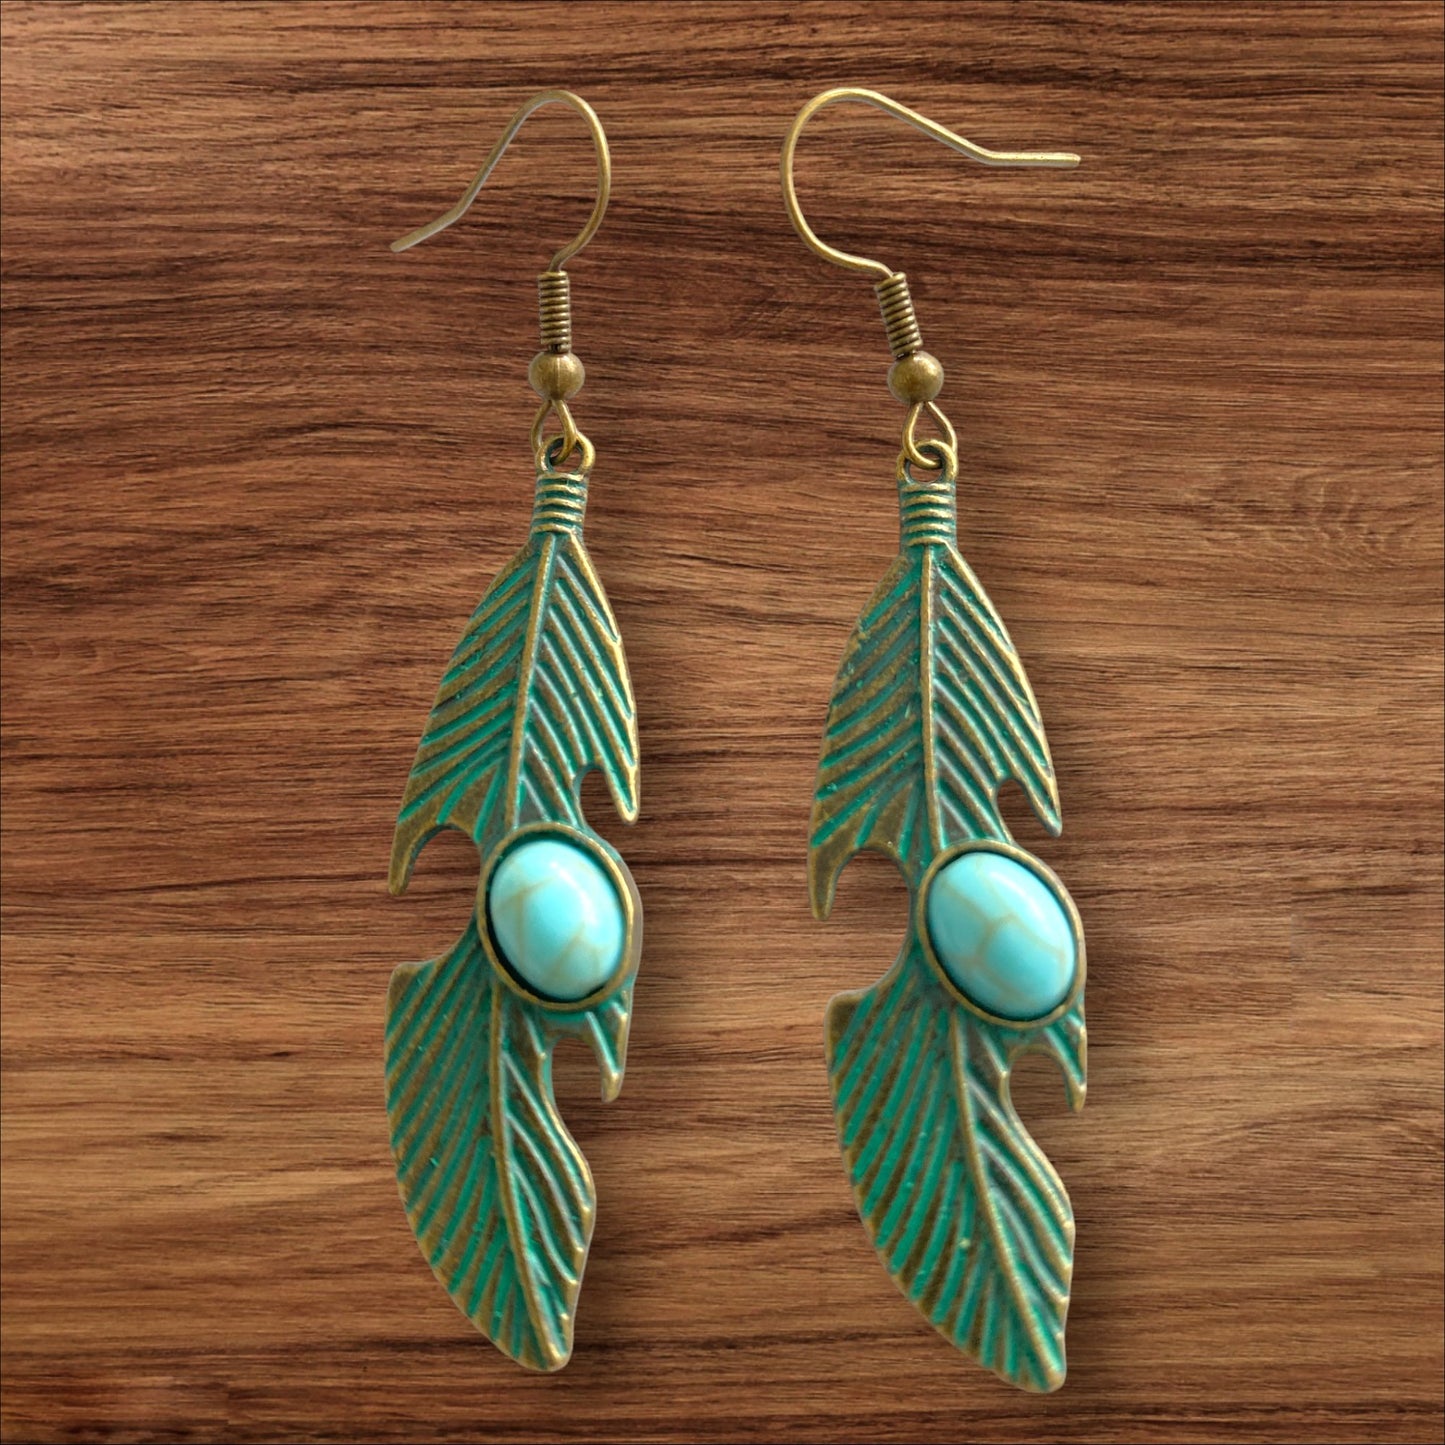 Feather Design with Turquoise Howlite Stone - Hook Earrings